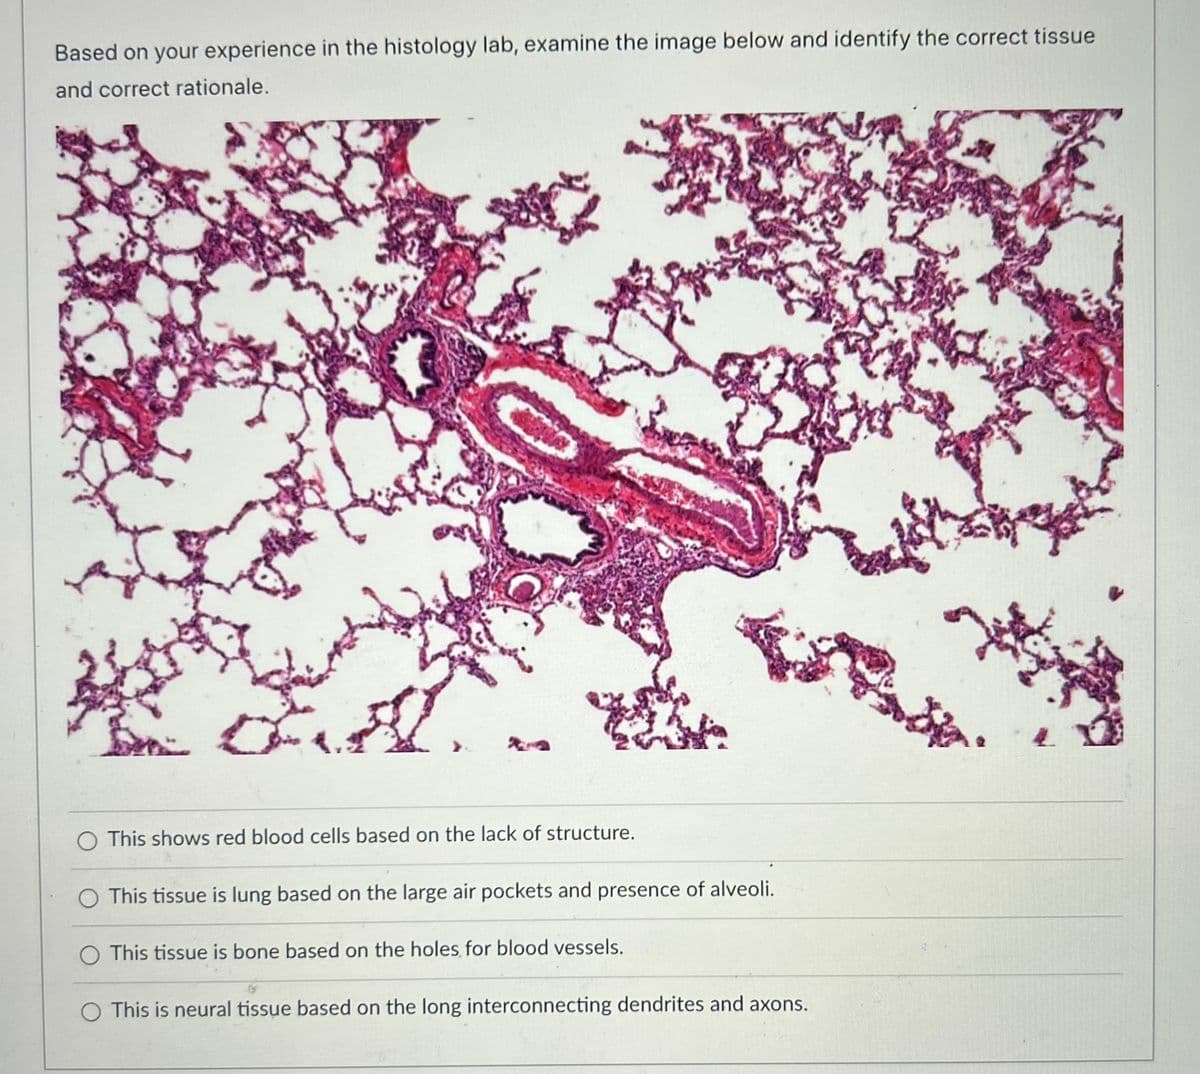 Based on your experience in the histology lab, examine the image below and identify the correct tissue
and correct rationale.
O This shows red blood cells based on the lack of structure.
O This tissue is lung based on the large air pockets and presence of alveoli.
This tissue is bone based on the holes for blood vessels.
O This is neural tissue based on the long interconnecting dendrites and axons.